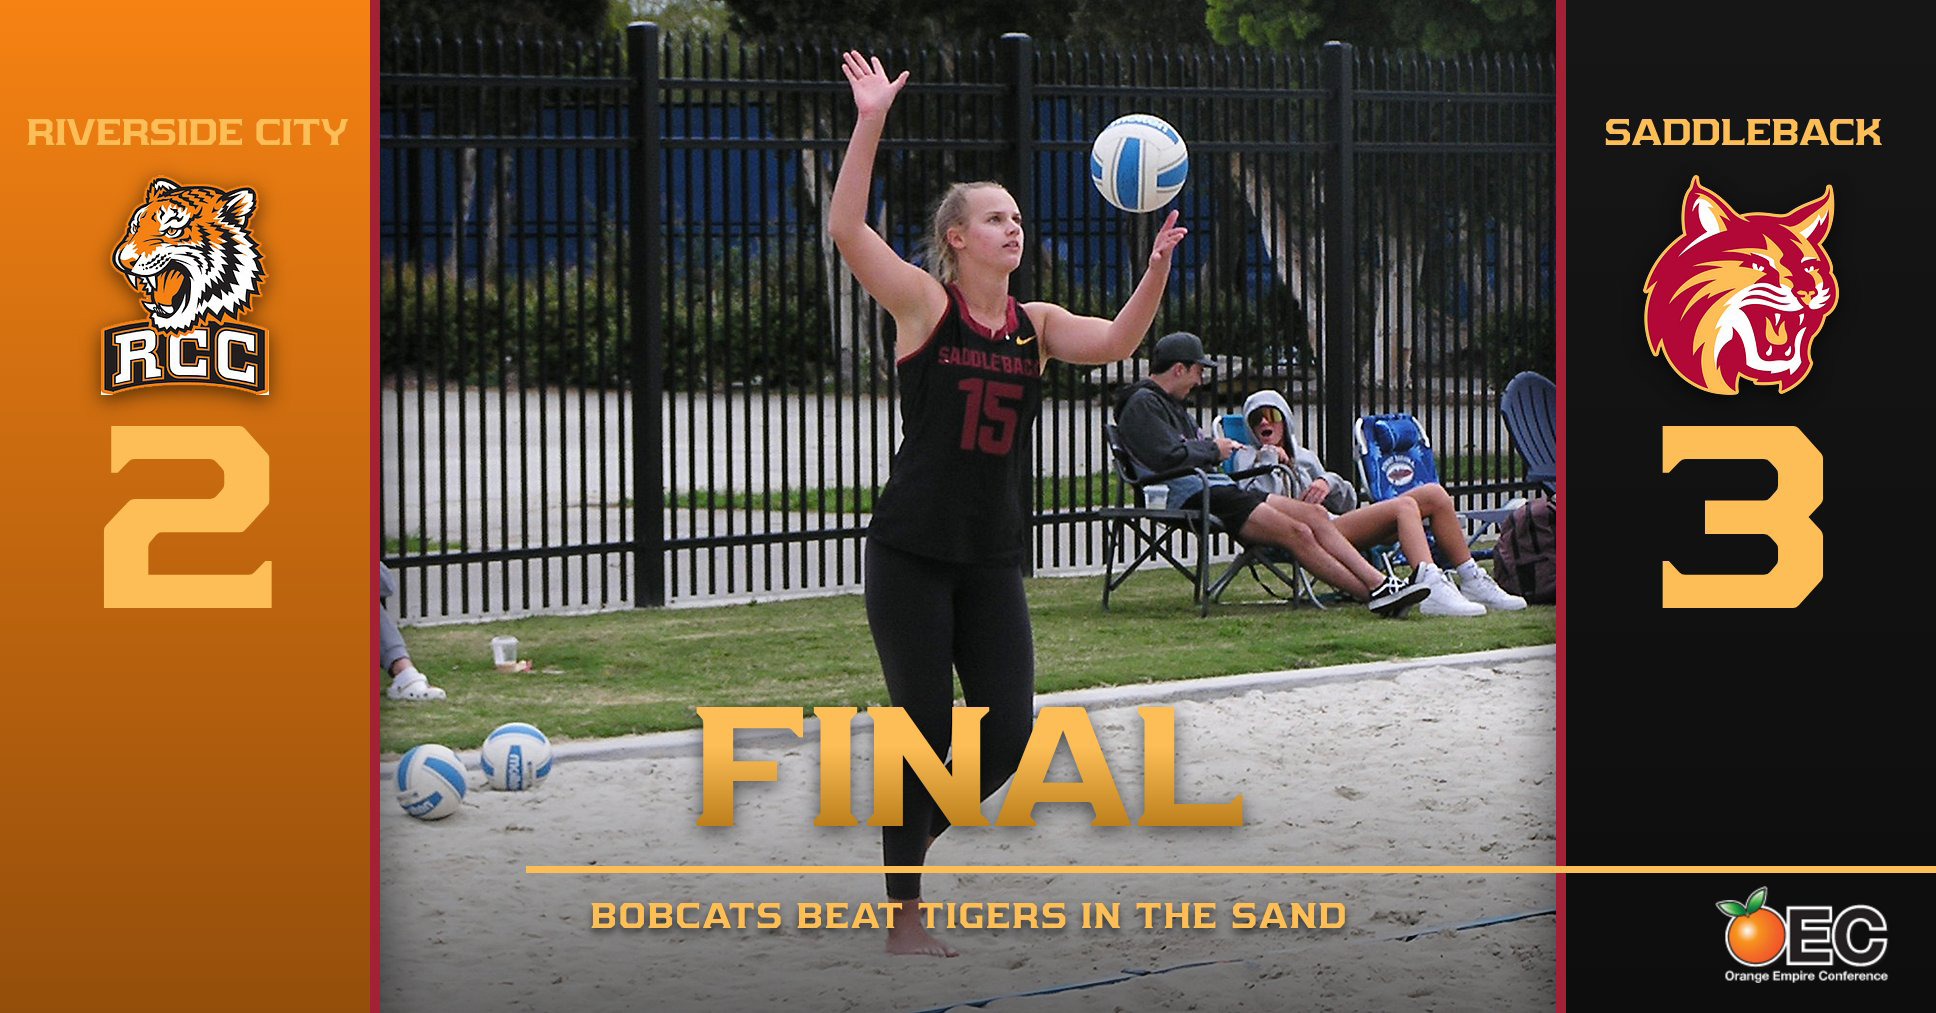 Bobcats growl at Tigers in the sand